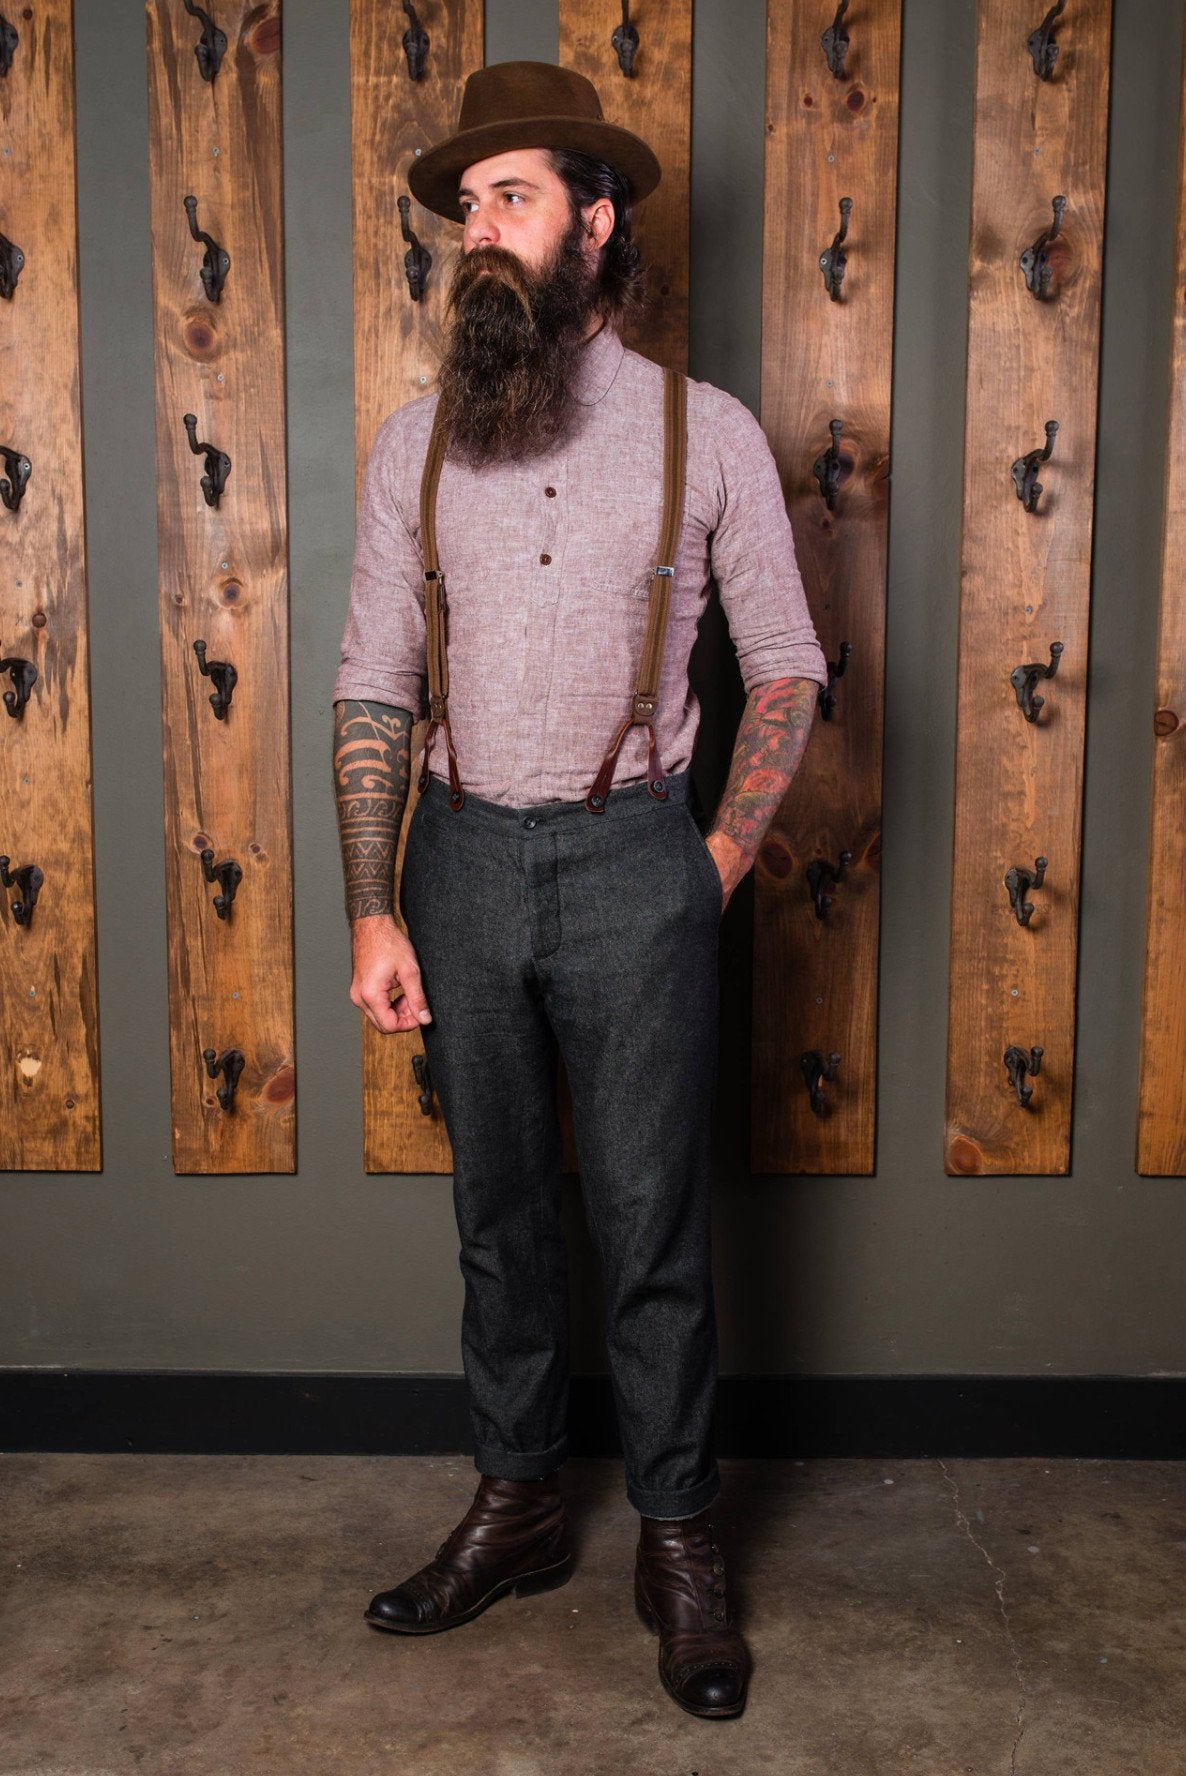 Bykowski Tailor & Garb Cossack Trouser vintage inspired suspenders tailored fit slim fit Railroad prohibition heritage clothing Gatsby Edwardian Dapper Casual 1930's 1920's 1910's 1800's Made in USA Handcrafted Denim